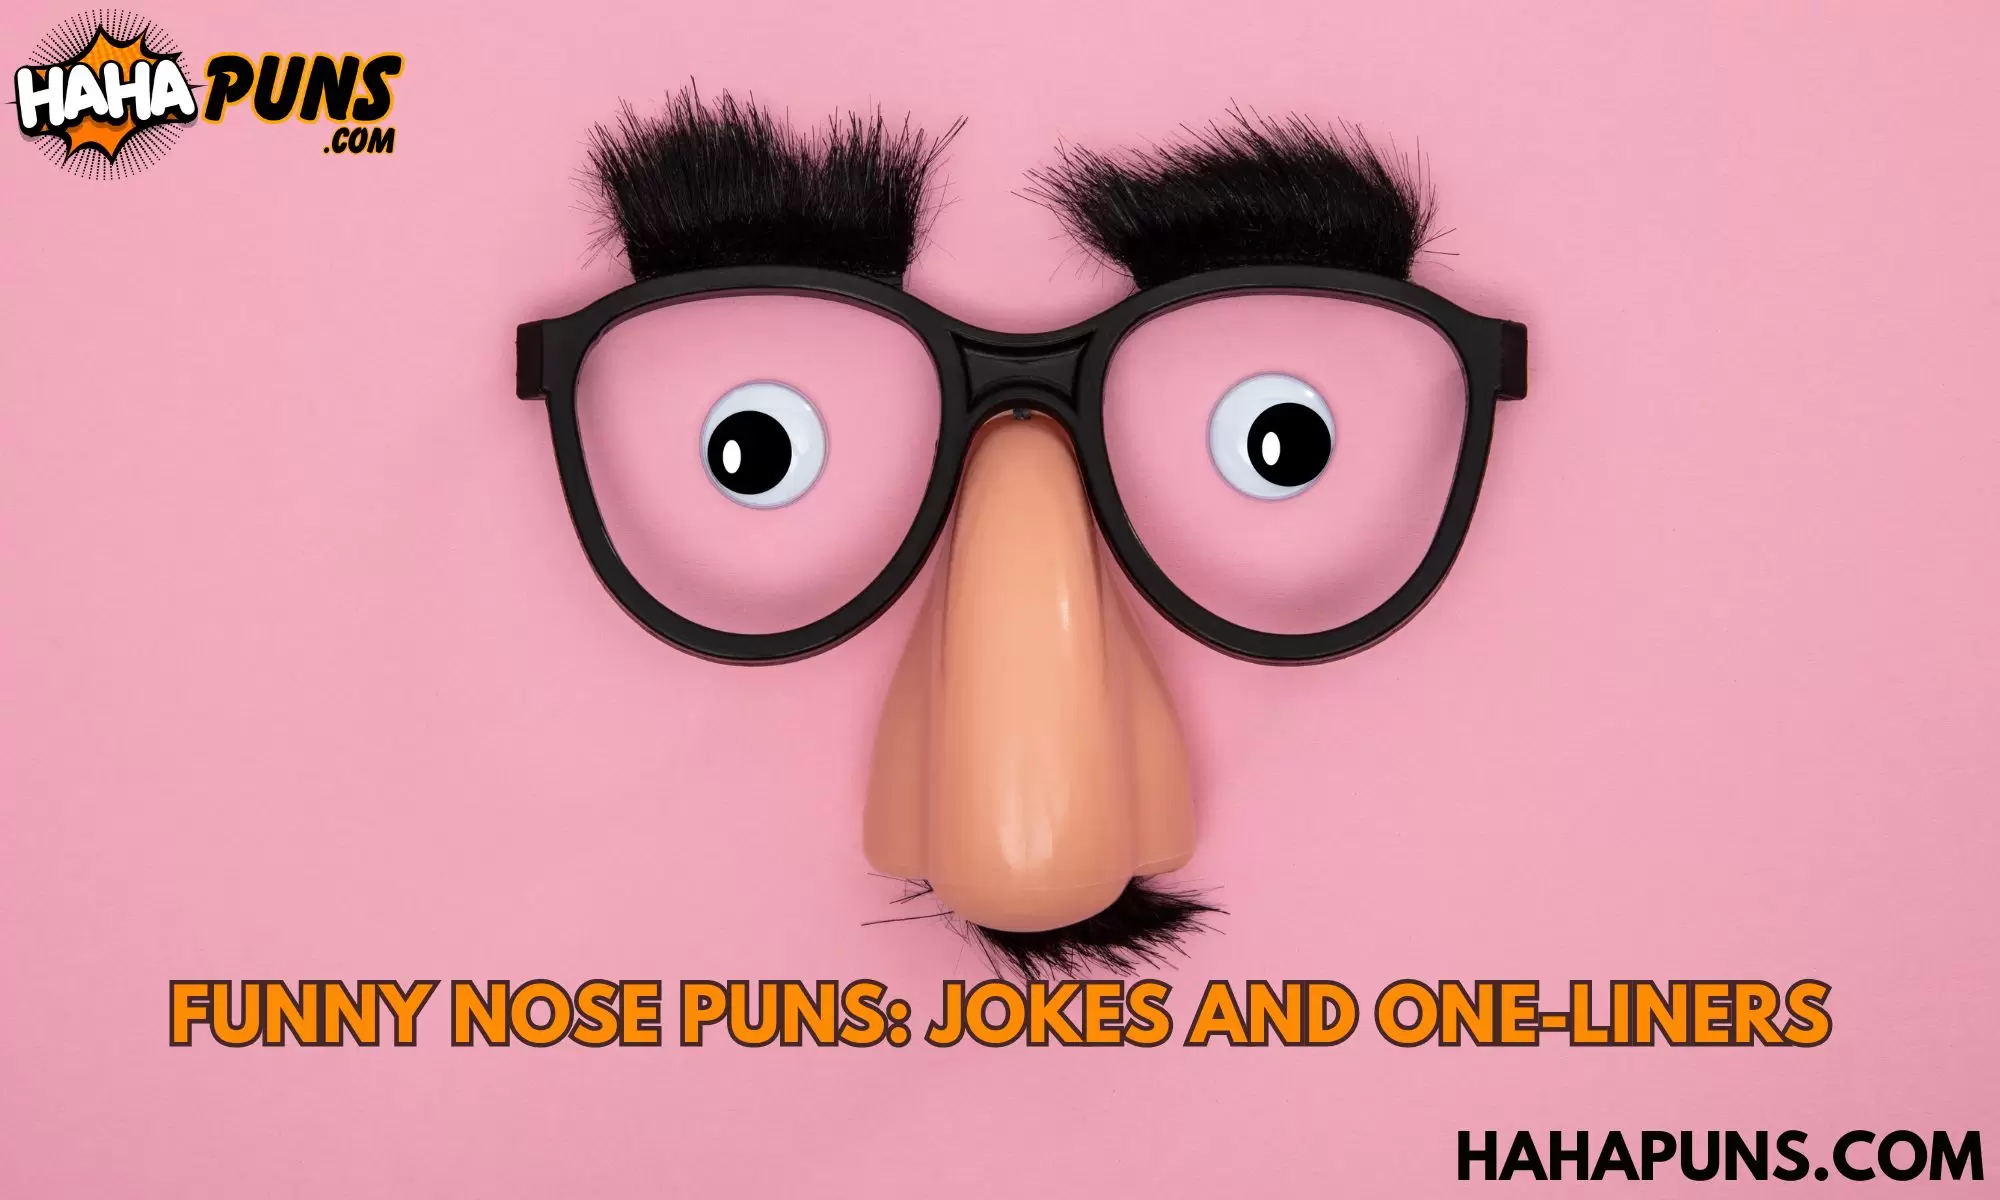 Funny Nose Puns: Jokes And One-Liners